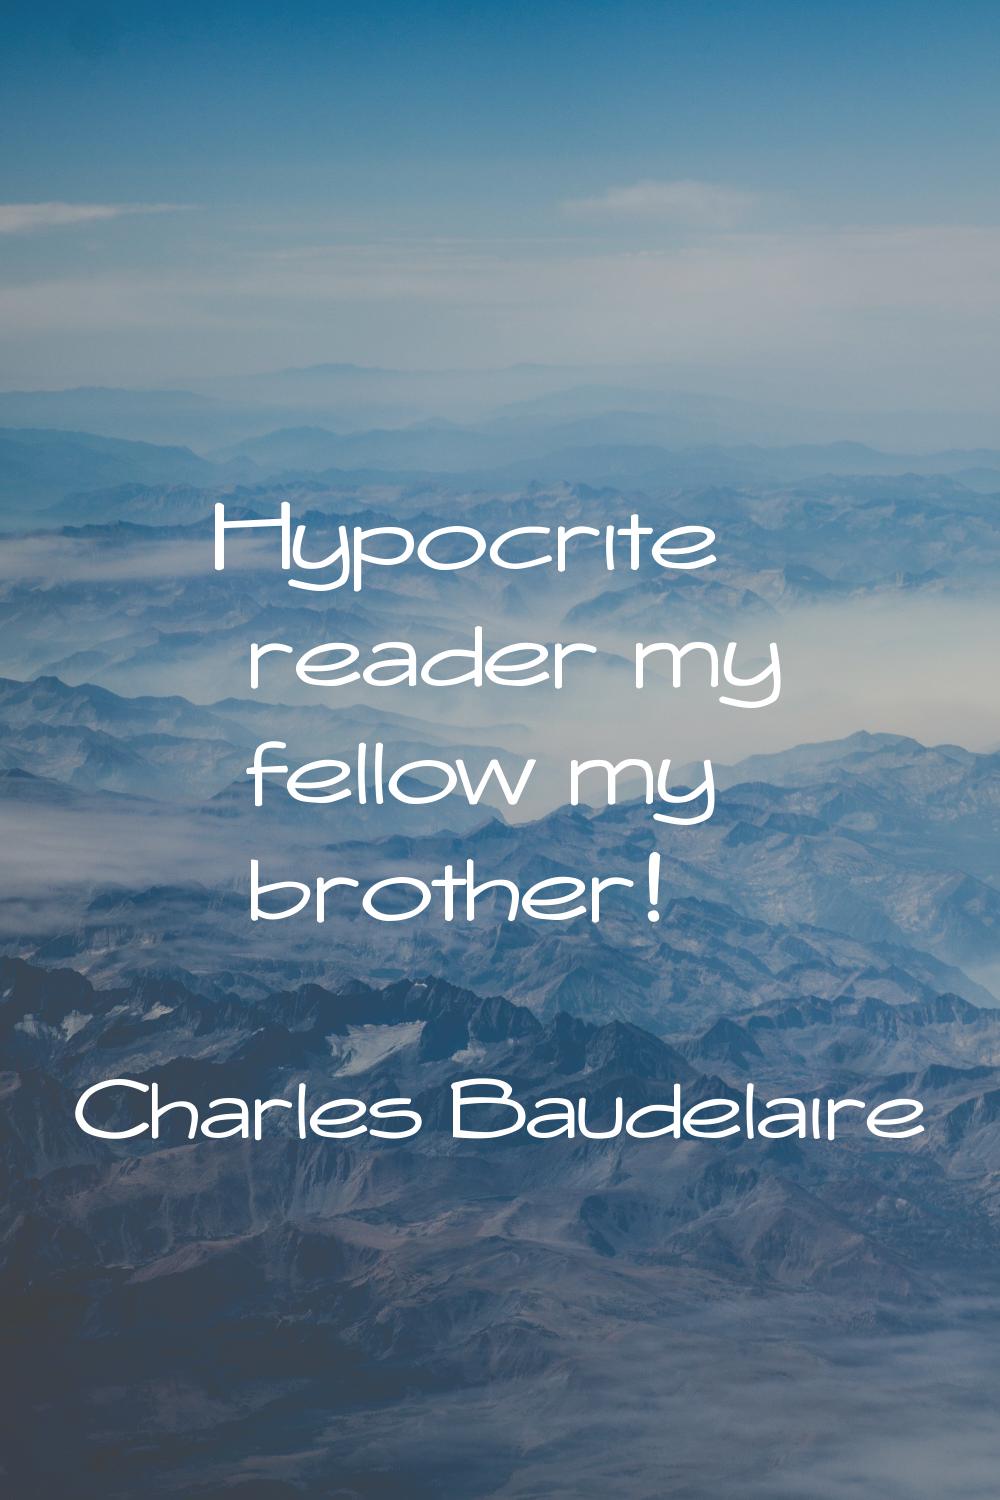 Hypocrite reader my fellow my brother!